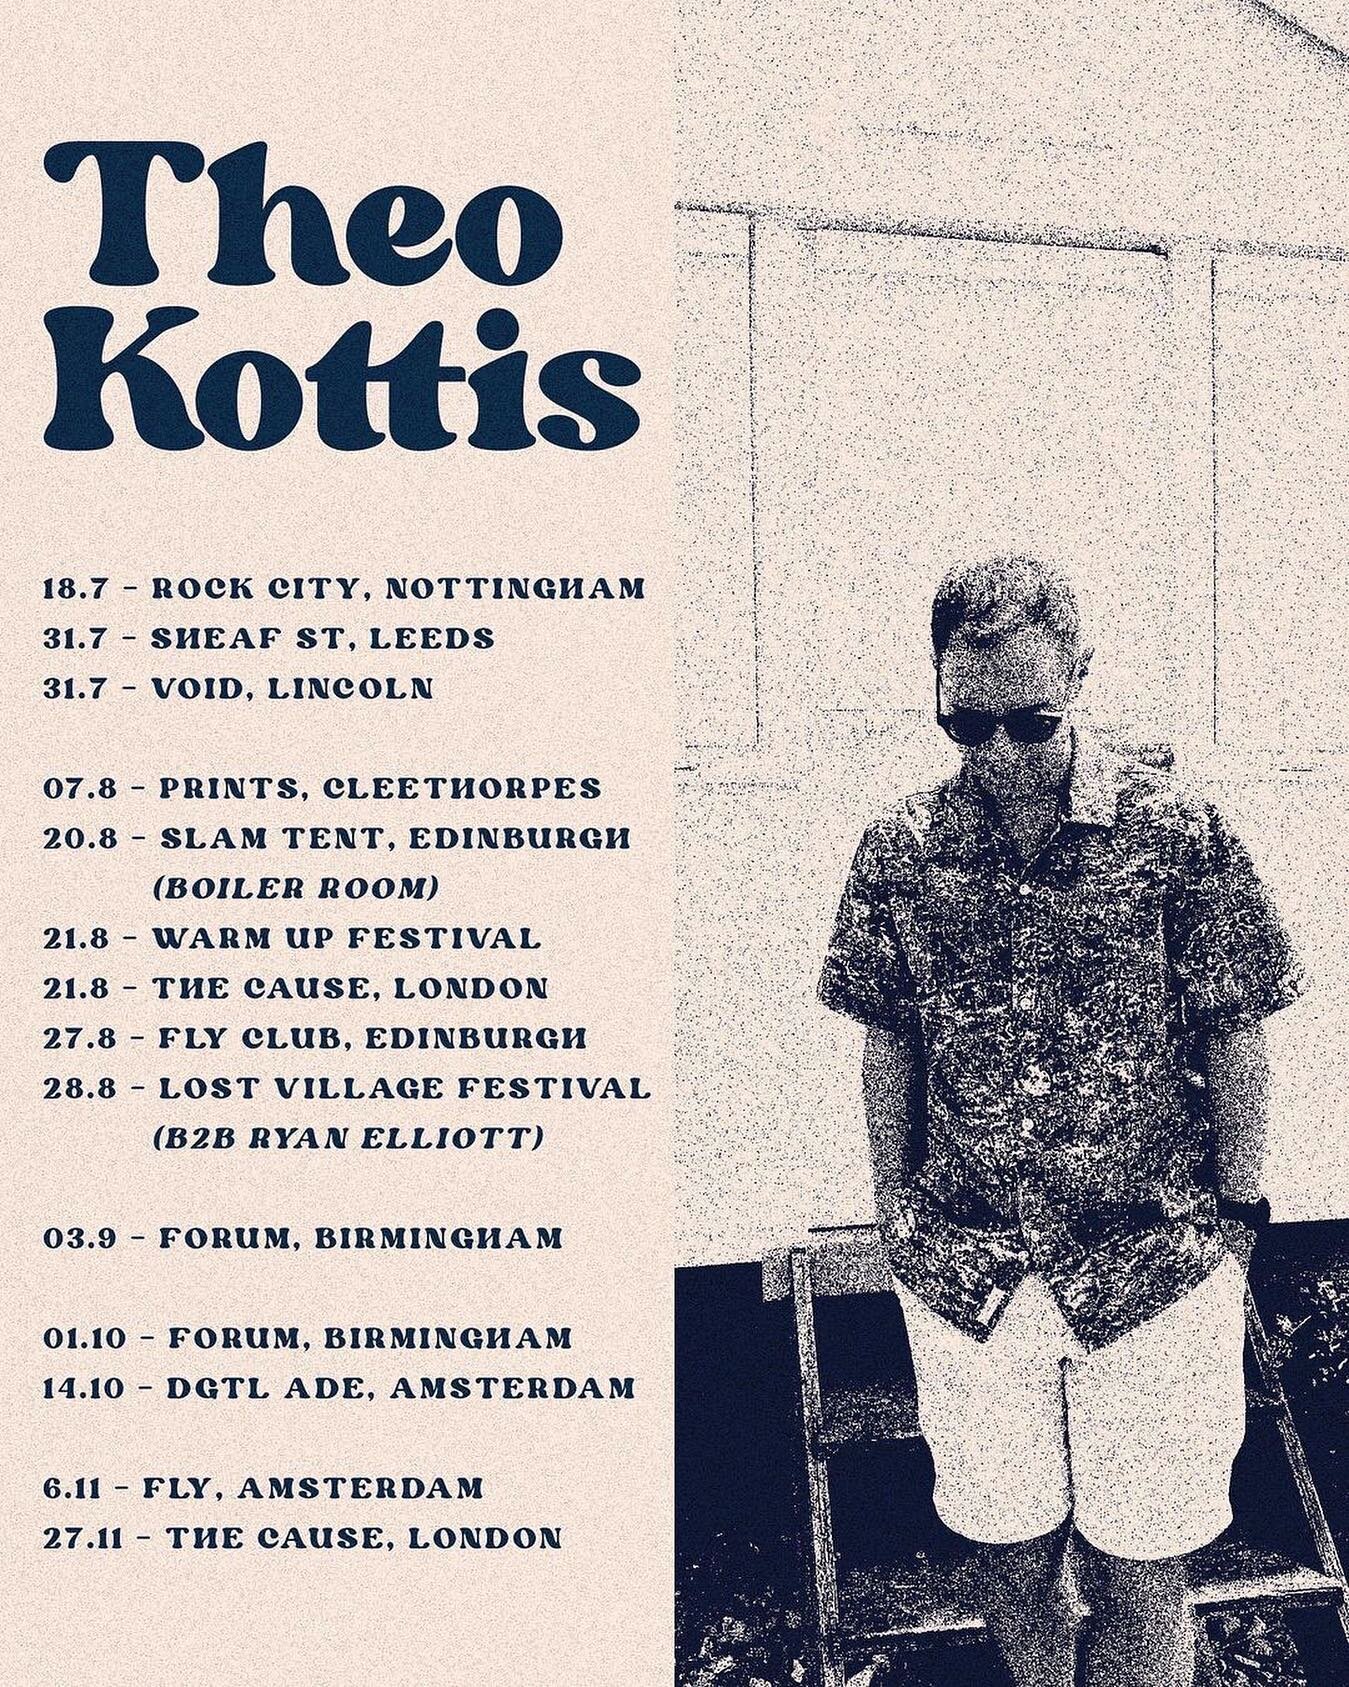 @theokottis - &ldquo;Surreal to be announcing shows again! Incredibly excited to get back to filling dancefloors but want to urge everyone to do so with caution, so we can party all year long and beyond!
⁣
We&rsquo;ve waited so long for this, so cons